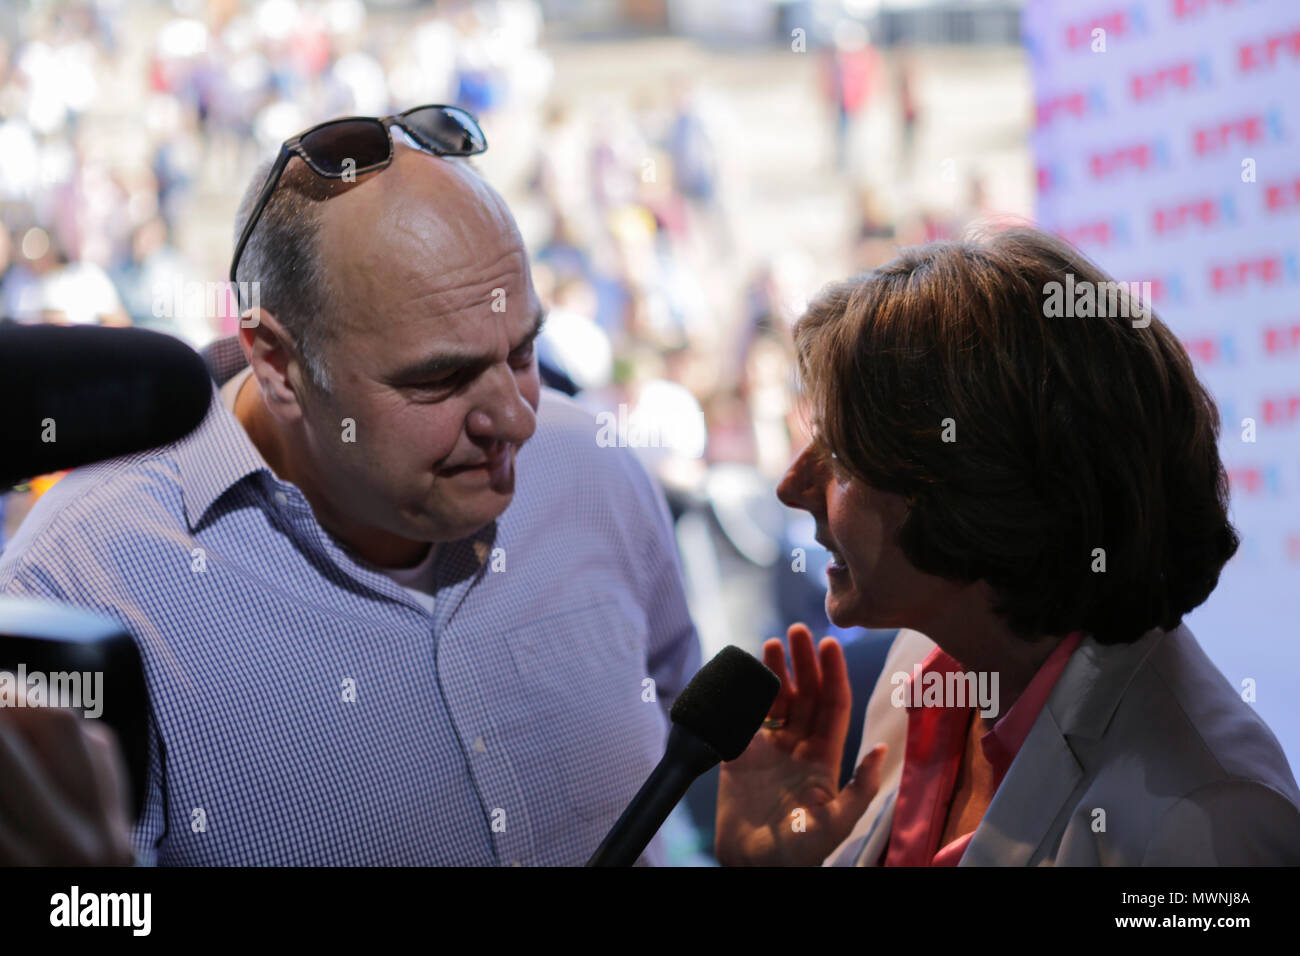 Worms, Germany. 1st June 2018. The Rhineland-Palatinate Minister?President Malu Dreyer gives an interview. Around 300.000 visitors are expected in the 34. Edition of the Rheinland-Pfalz-Tag (Rhineland-Palatinate Day) in Worms. The Rheinland-Pfalz-Tag is a annual event that showcases the German state of Rhineland-Palatinate. Credit: PACIFIC PRESS/Alamy Live News Stock Photo